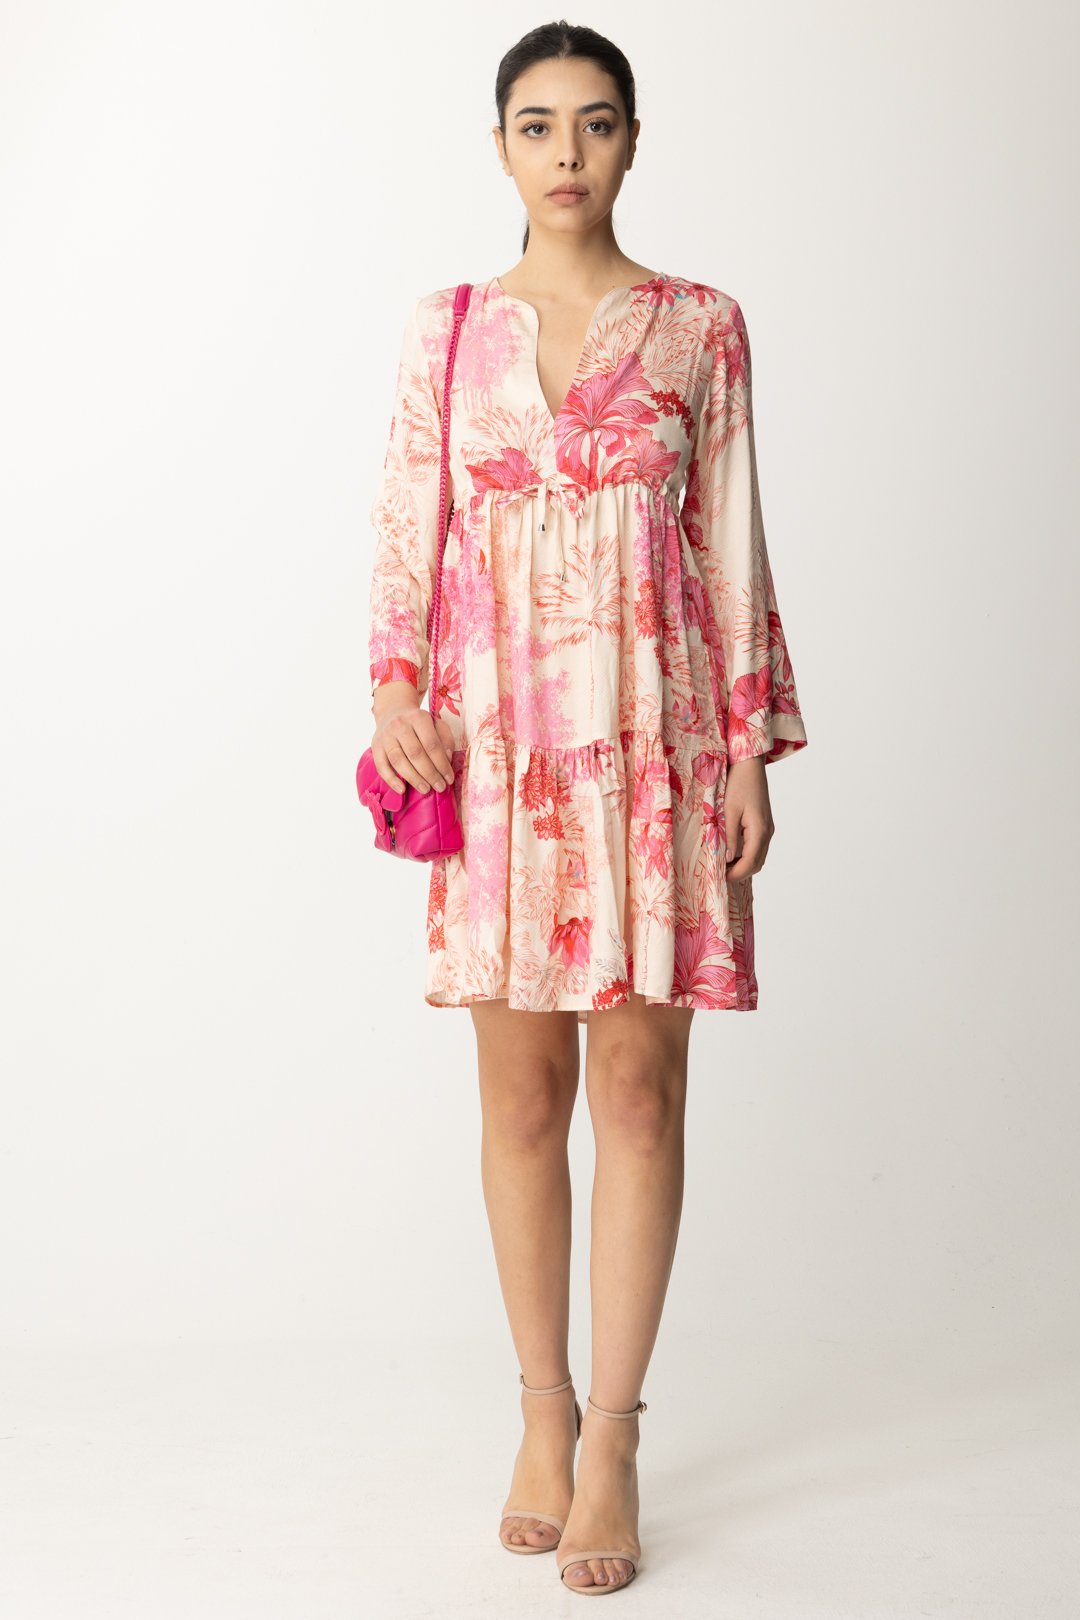 Preview: Replay Patterned mini dress with flounce BEIGE/FUCHSIA